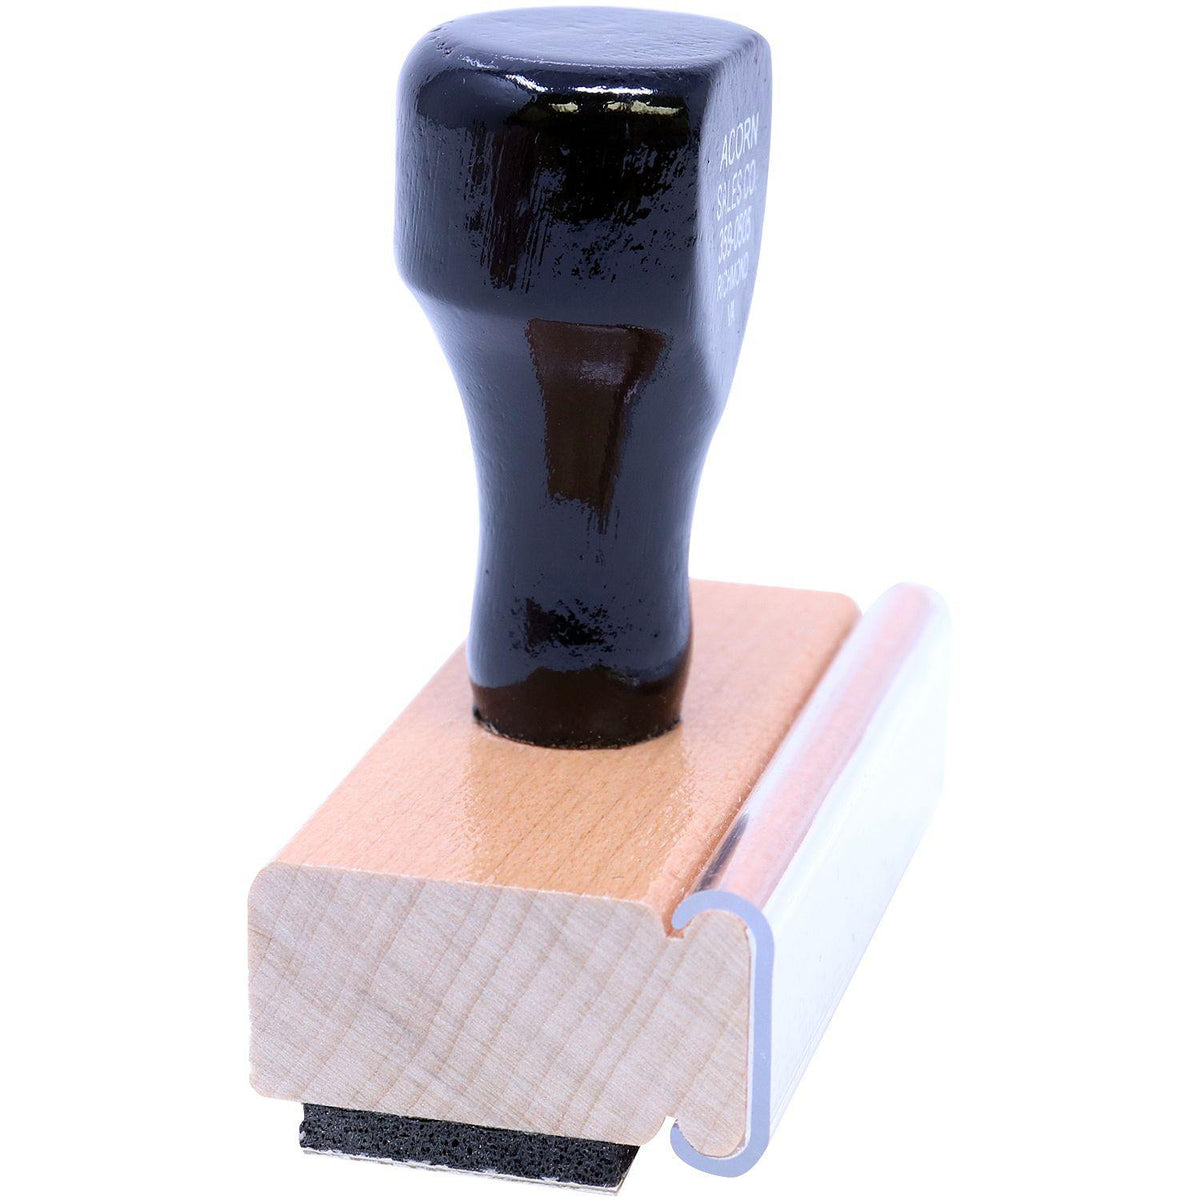 Side View of Large Outline COD Rubber Stamp at an Angle